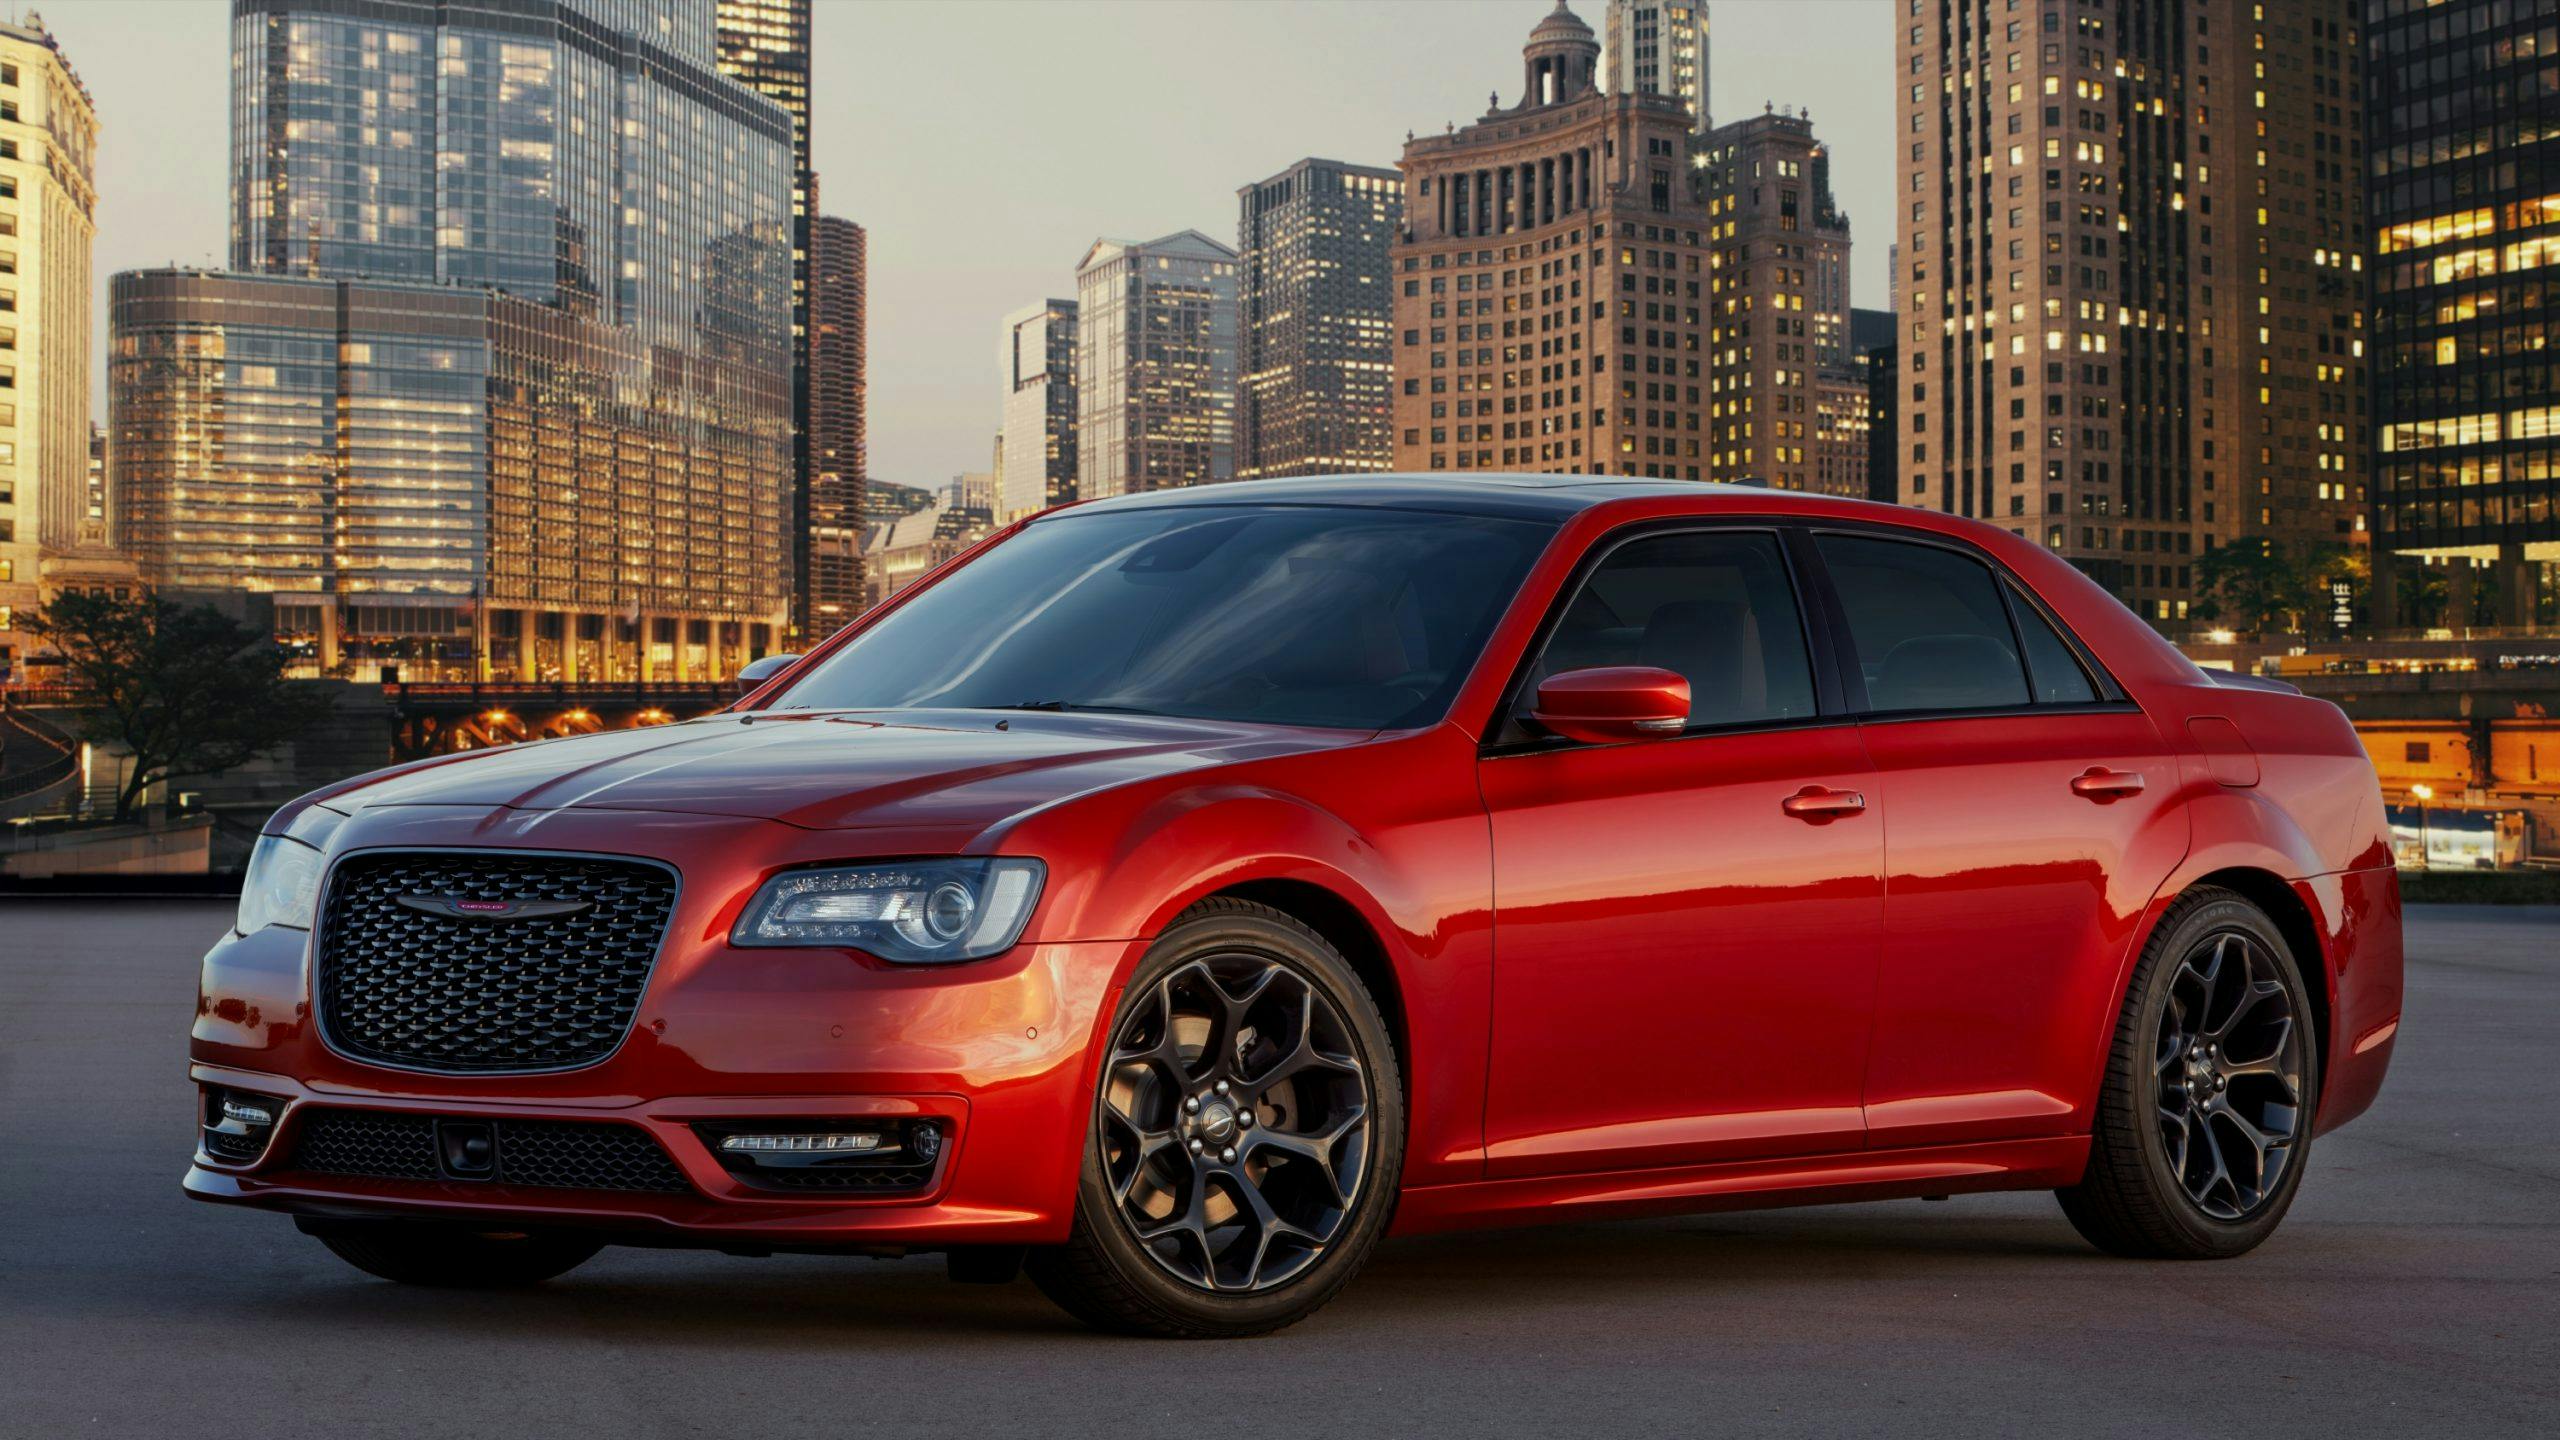 2021 Chrysler 300 in Canyon Sunset front three-quarter